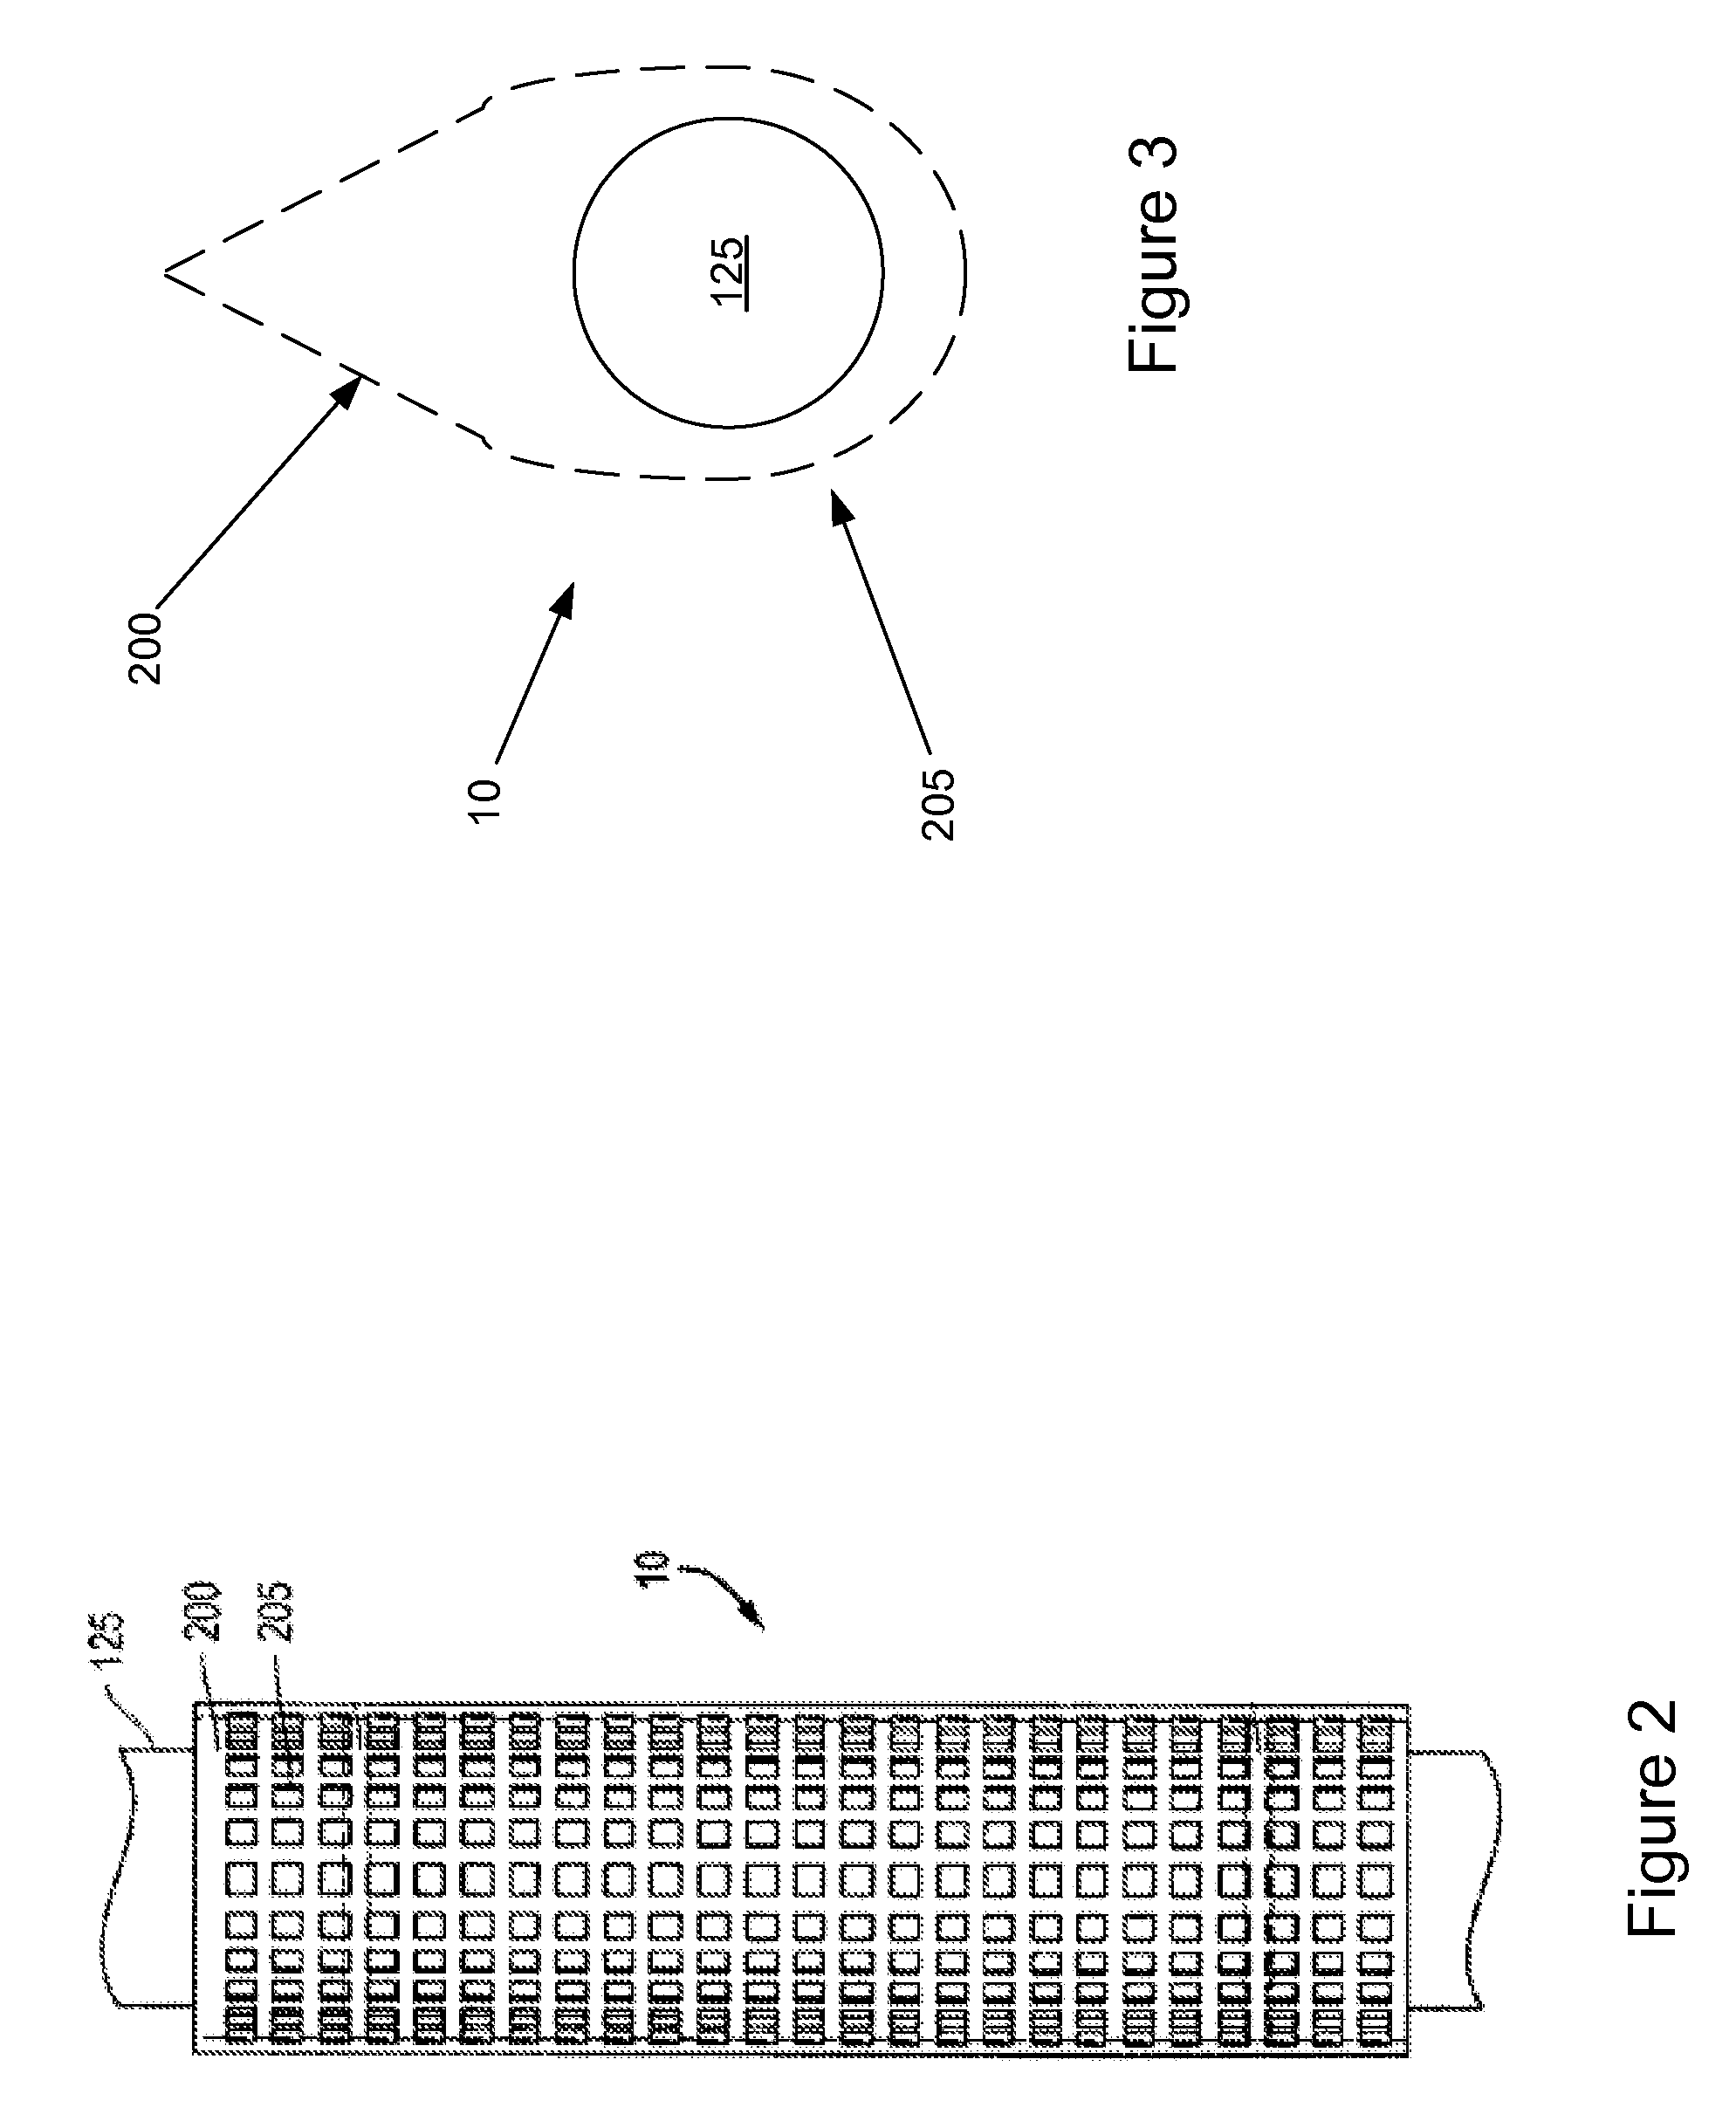 Systems and methods for reducing drag and/or vortex induced vibration